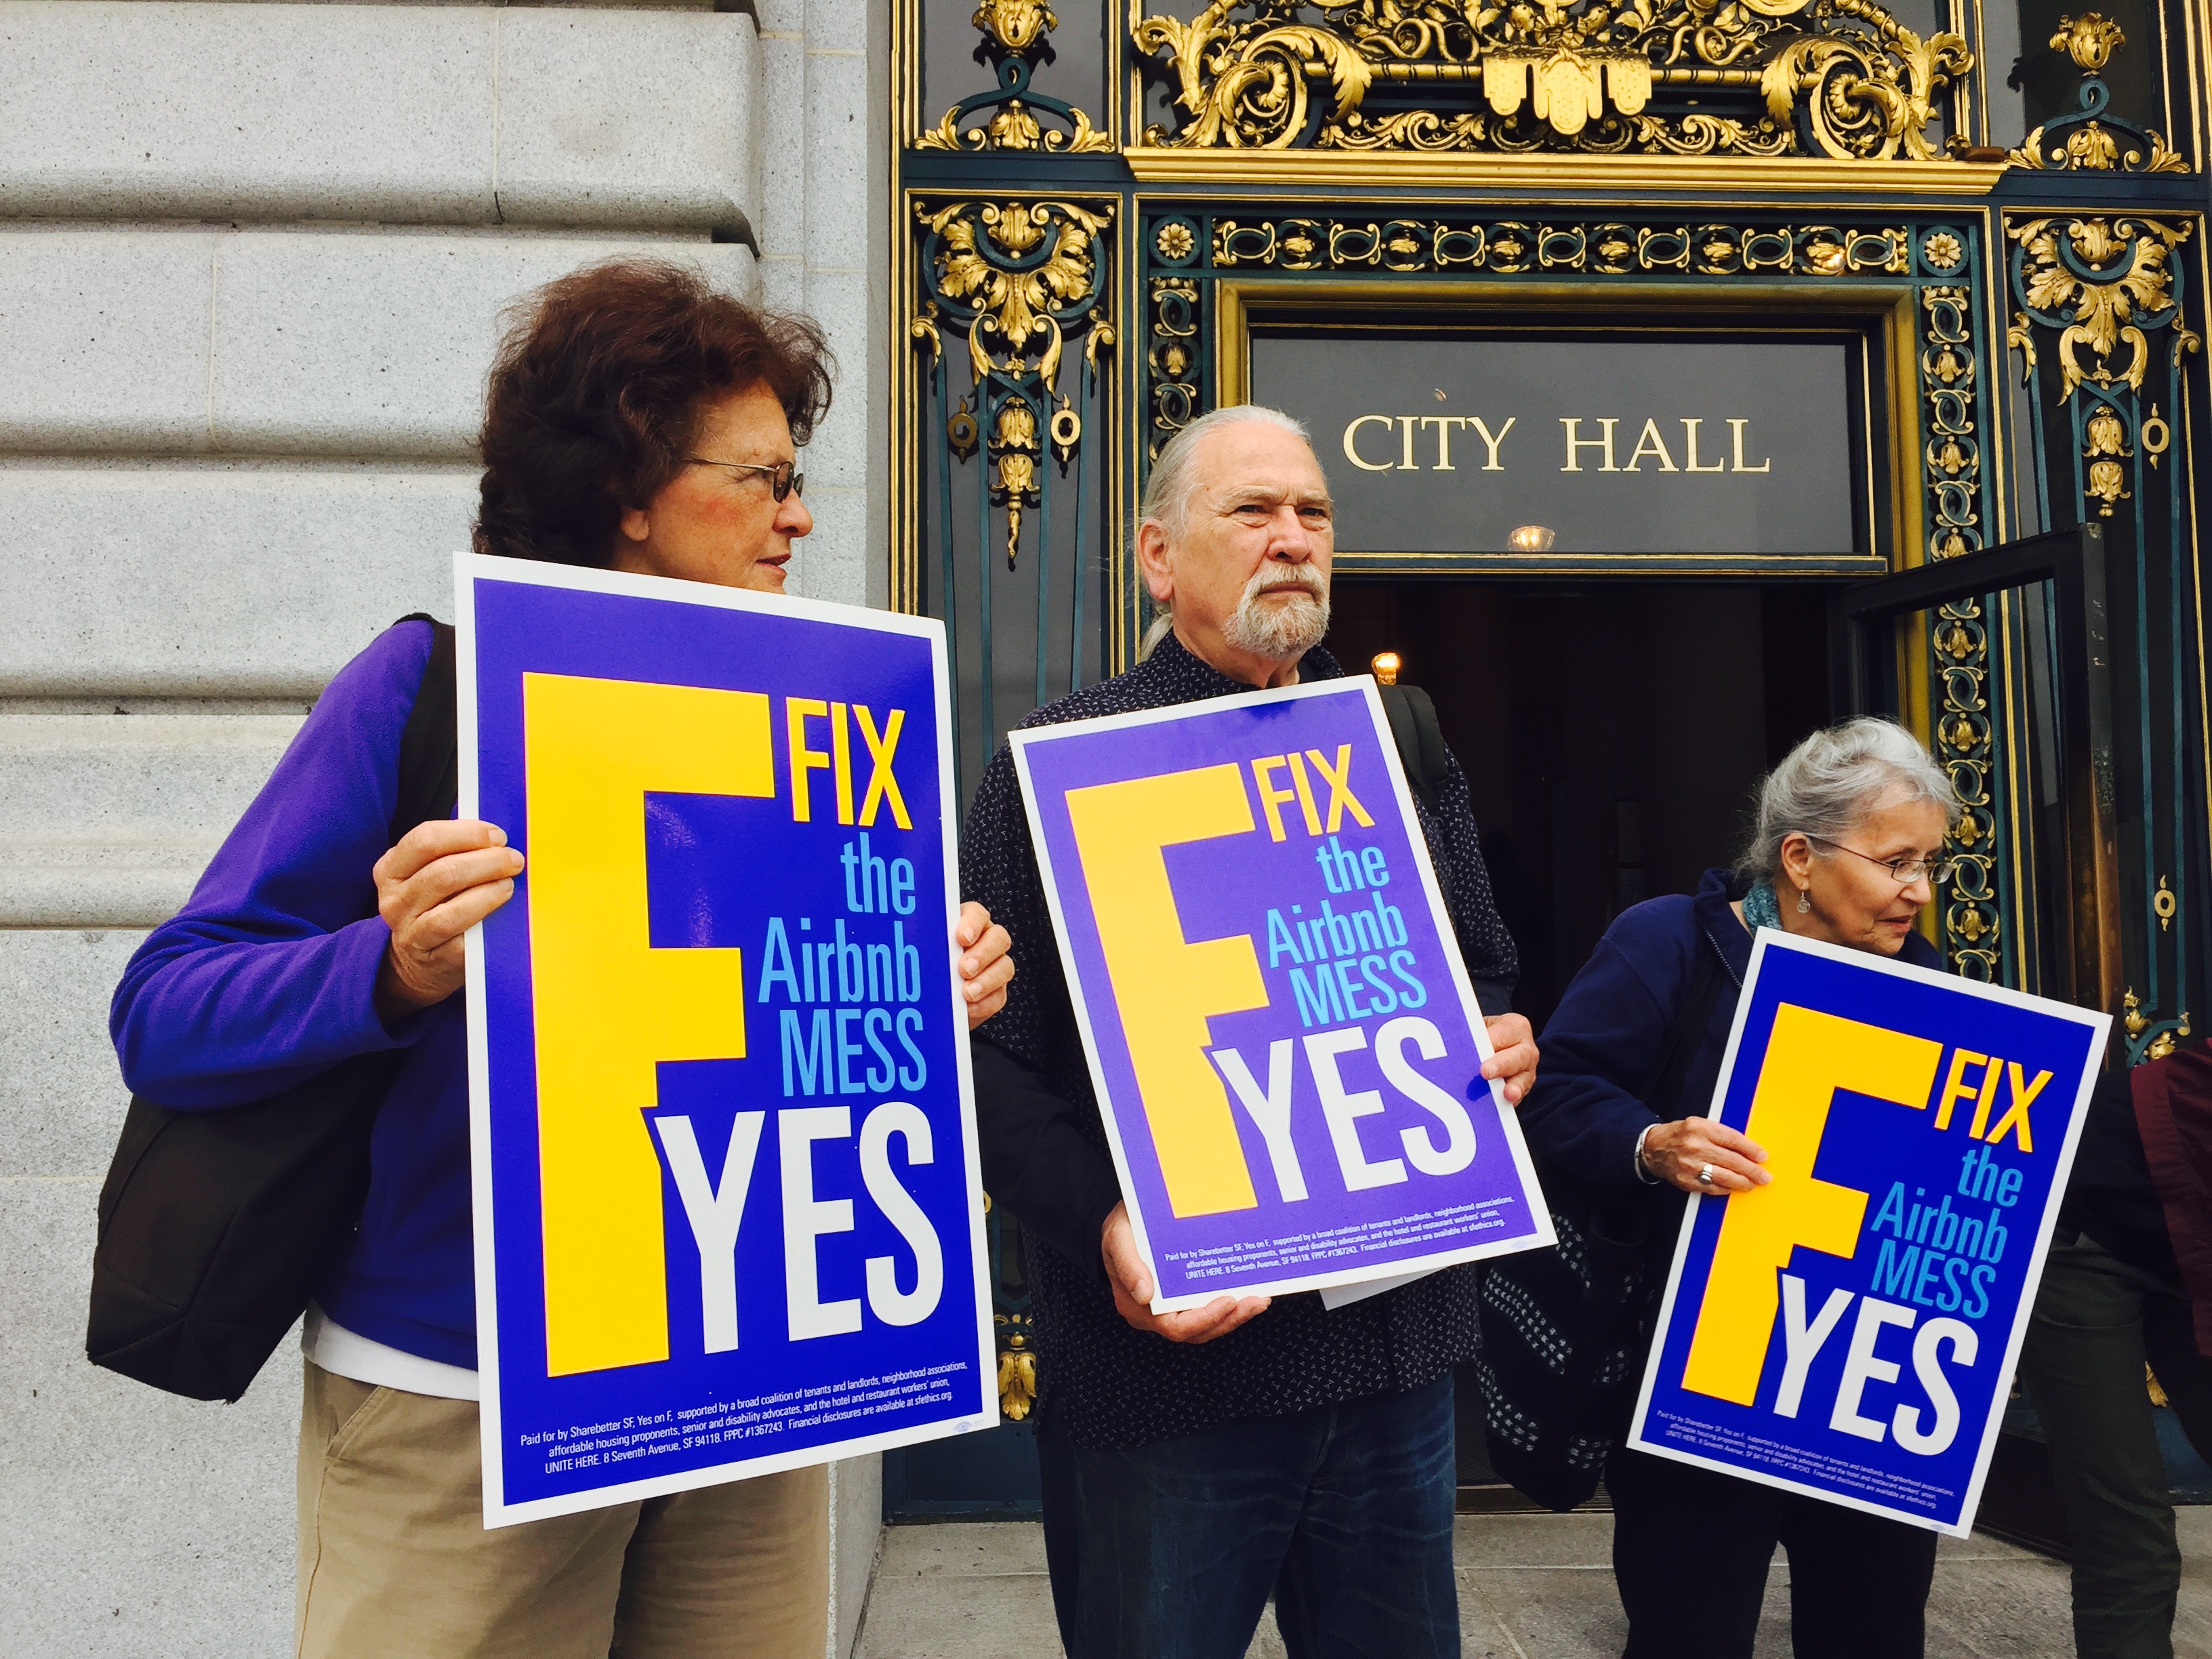 Supporters of a proposition that would place stricter limits on how often residents can rent out homes or rooms on Airbnb stand on the steps of San Francisco's city hall on Sept. 30, 2015. (Katy Steinmetz for TIME)